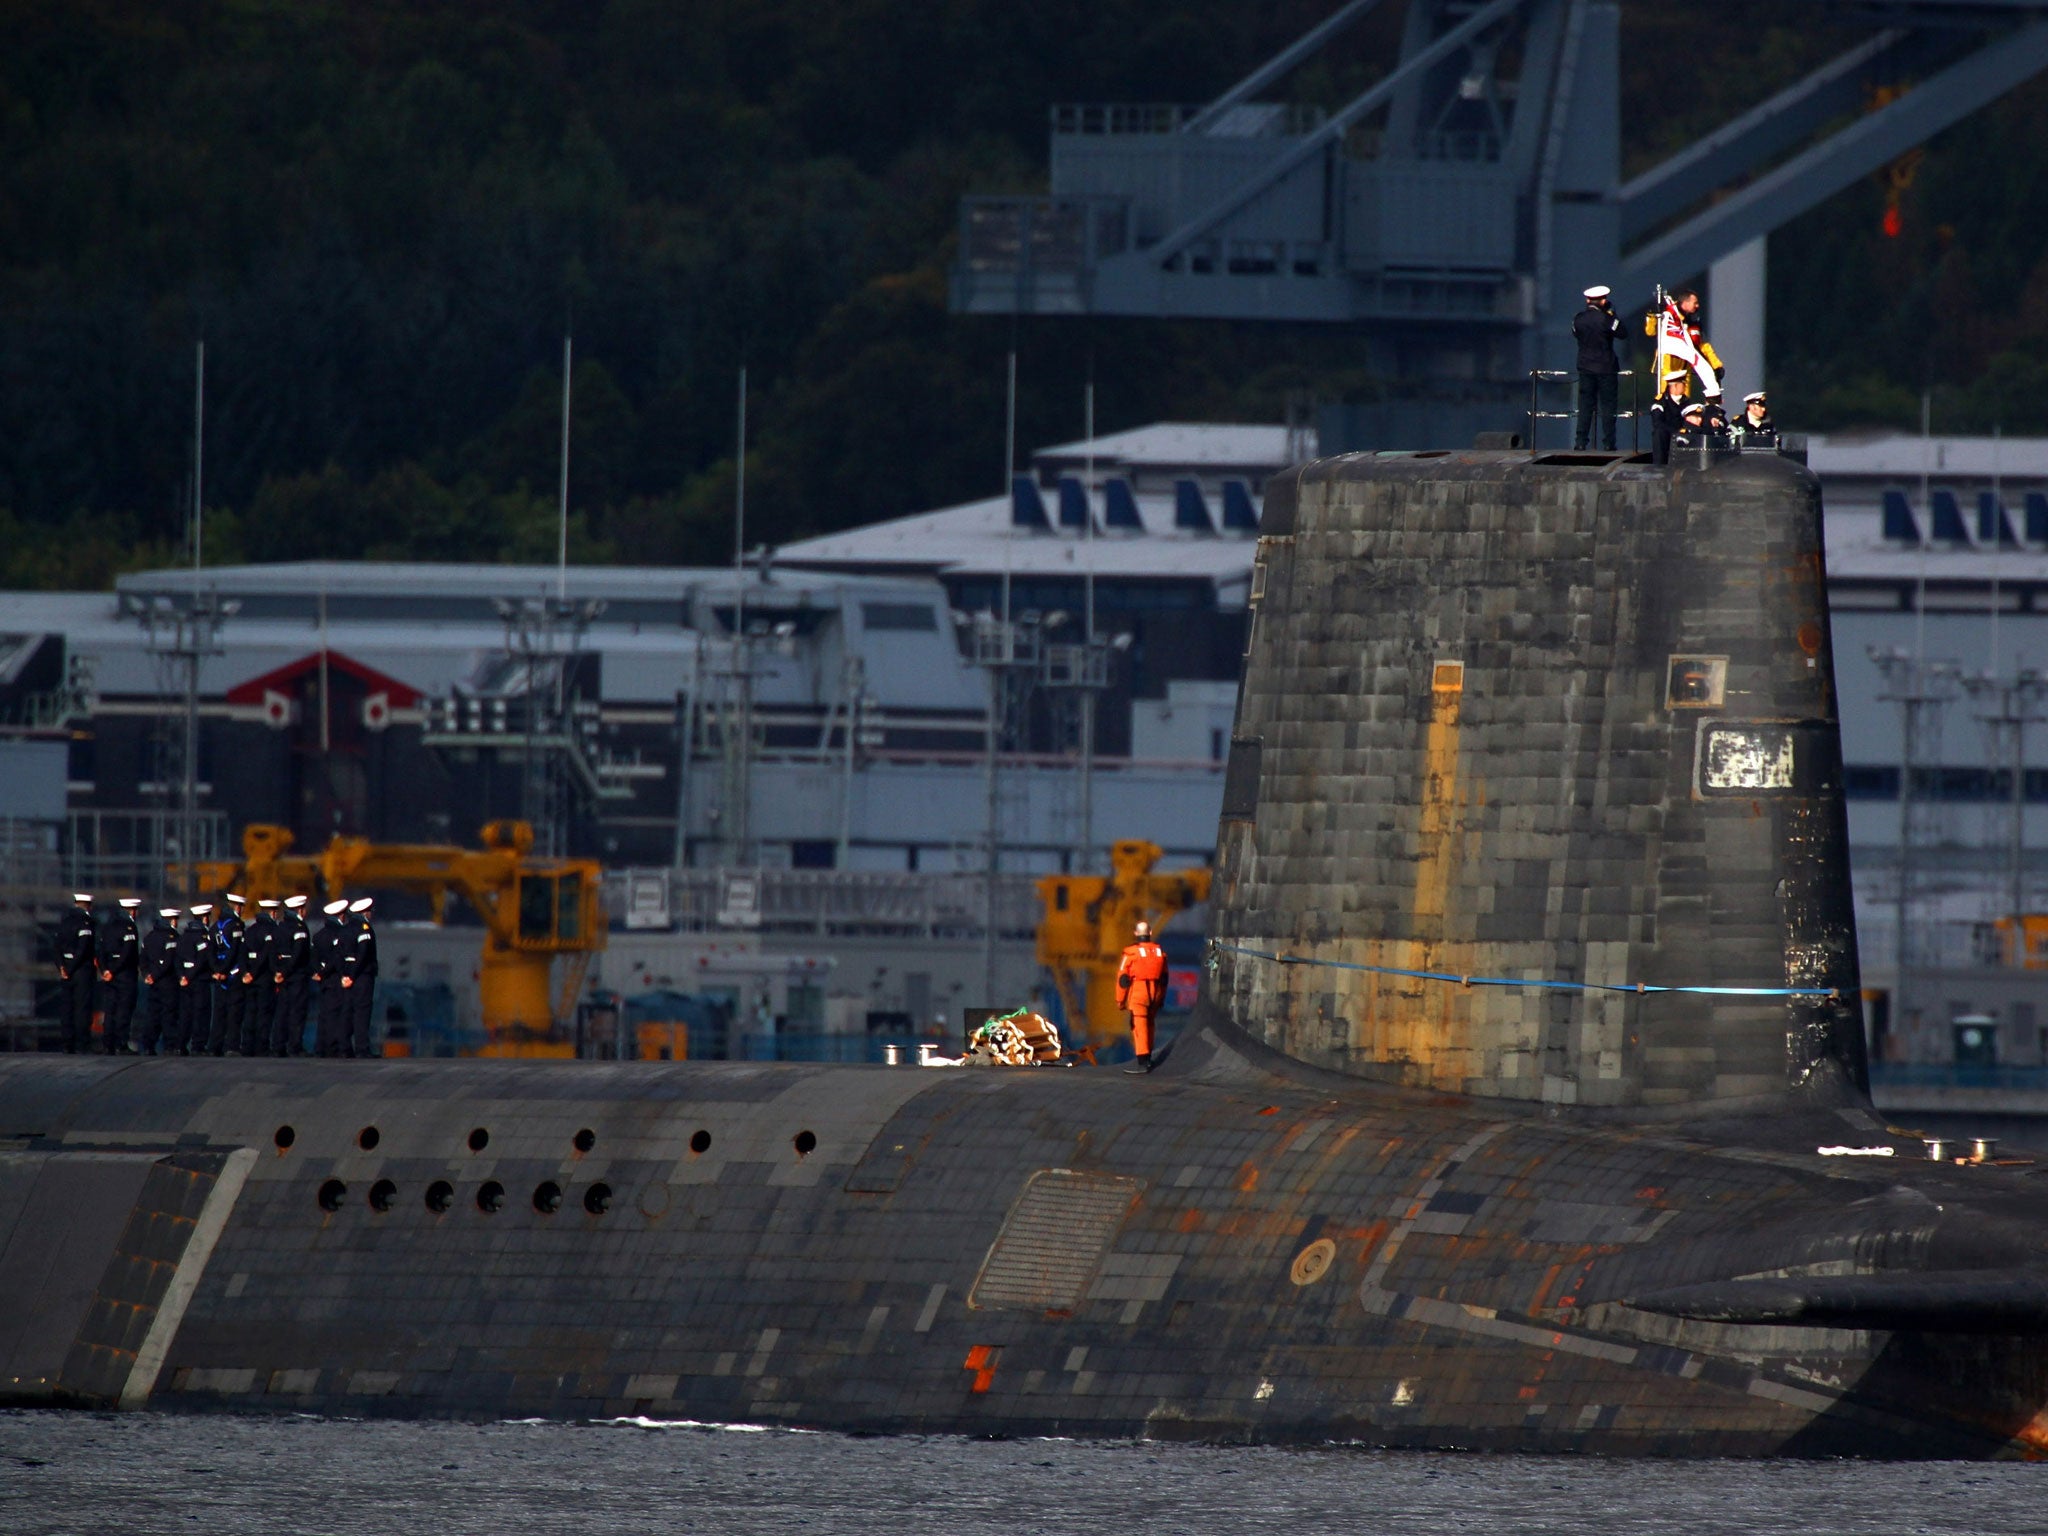 Moving the Trident nuclear deterrent from the Clyde to a new site in the remaining UK would take years to achieve